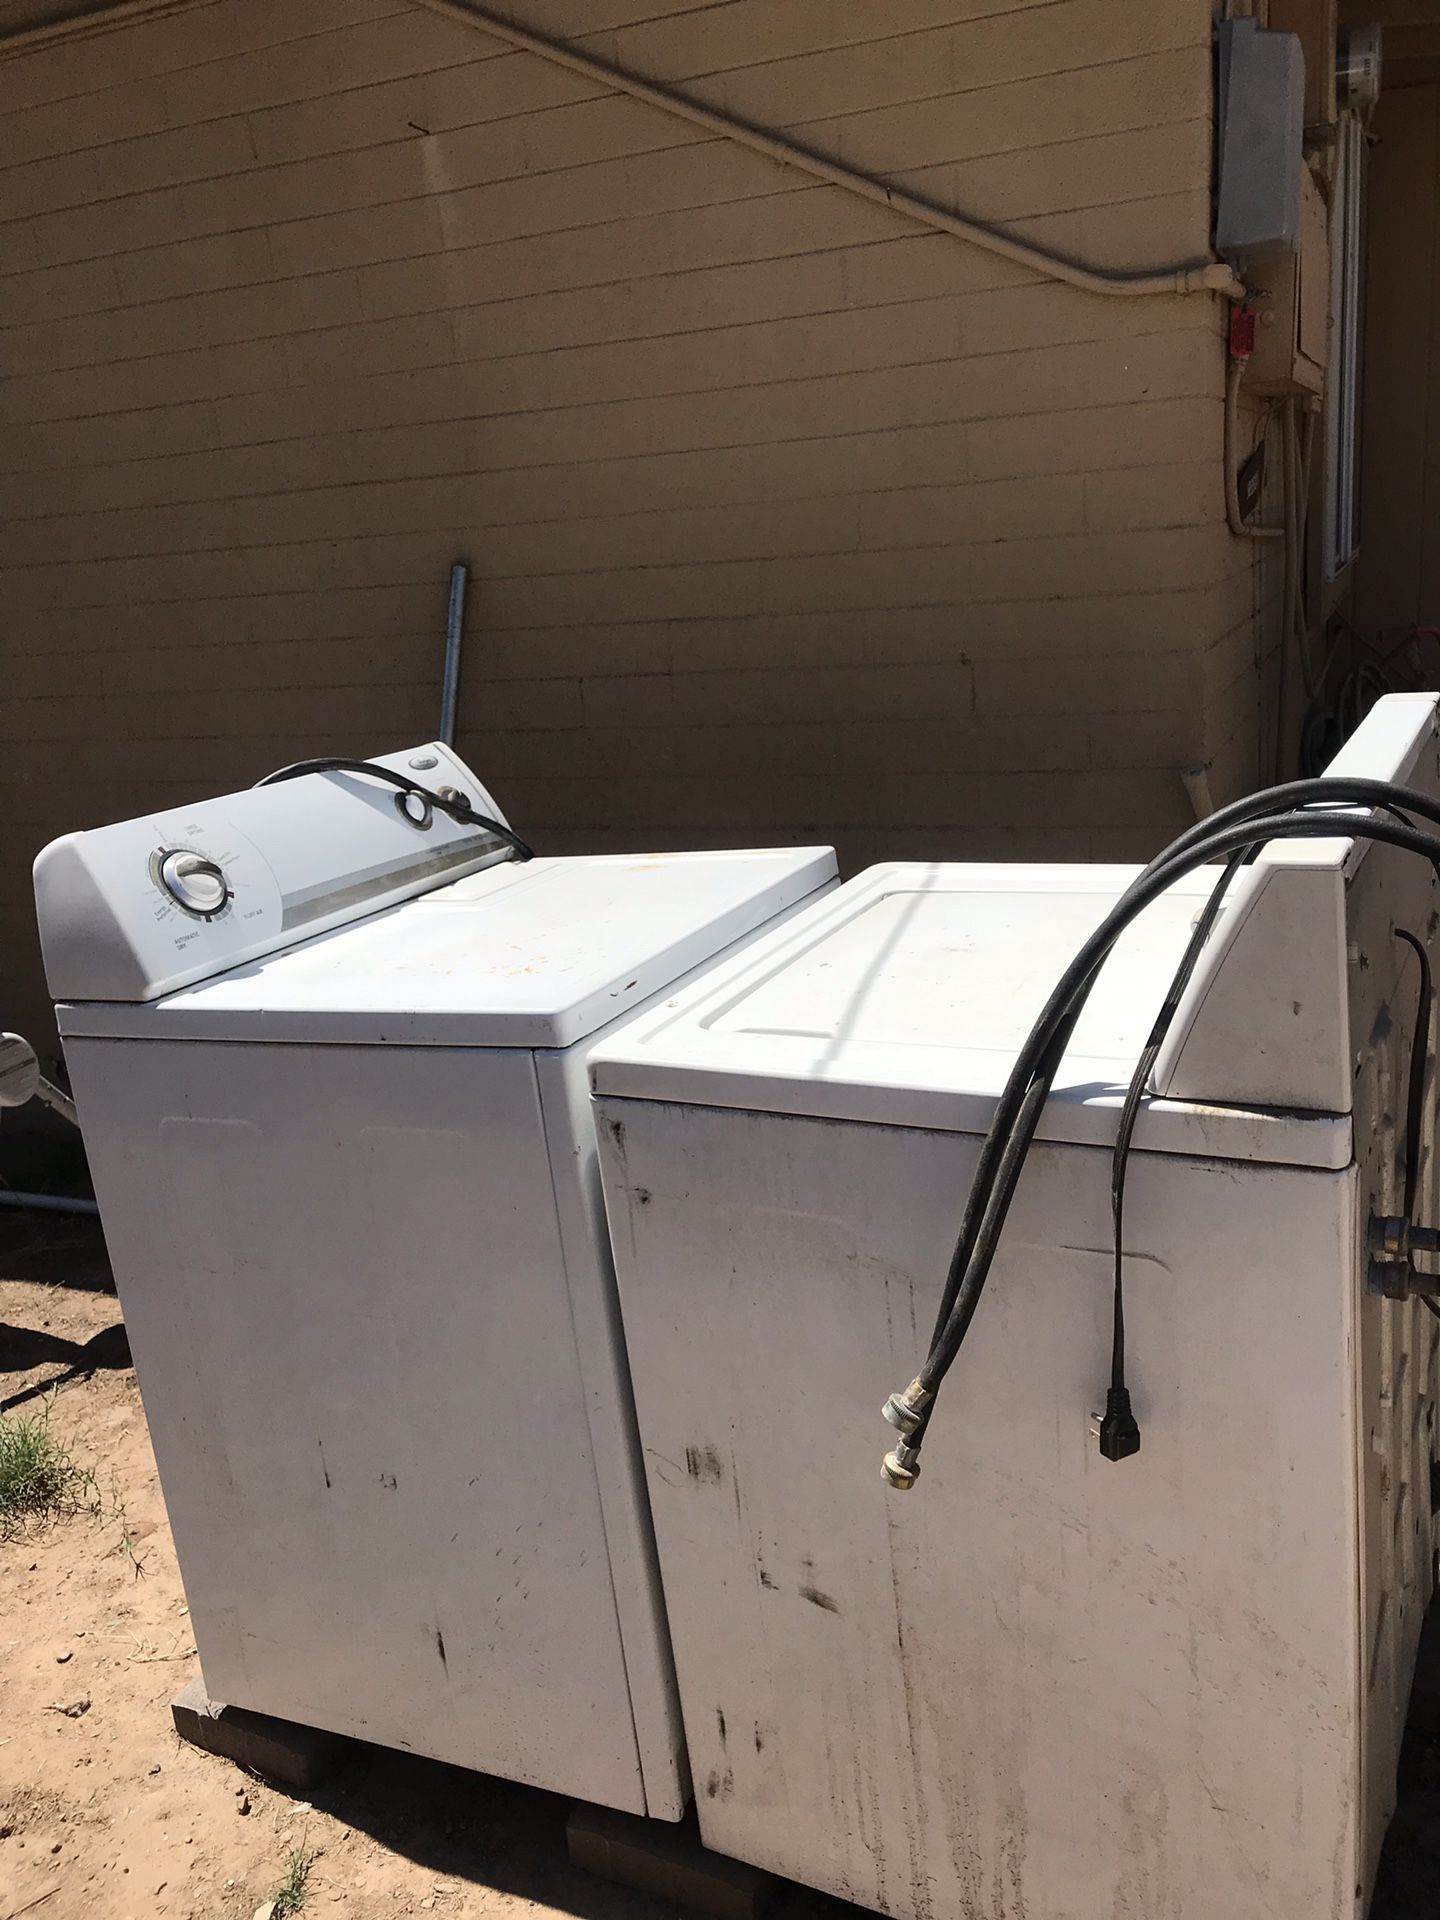 FREE washer and dryer